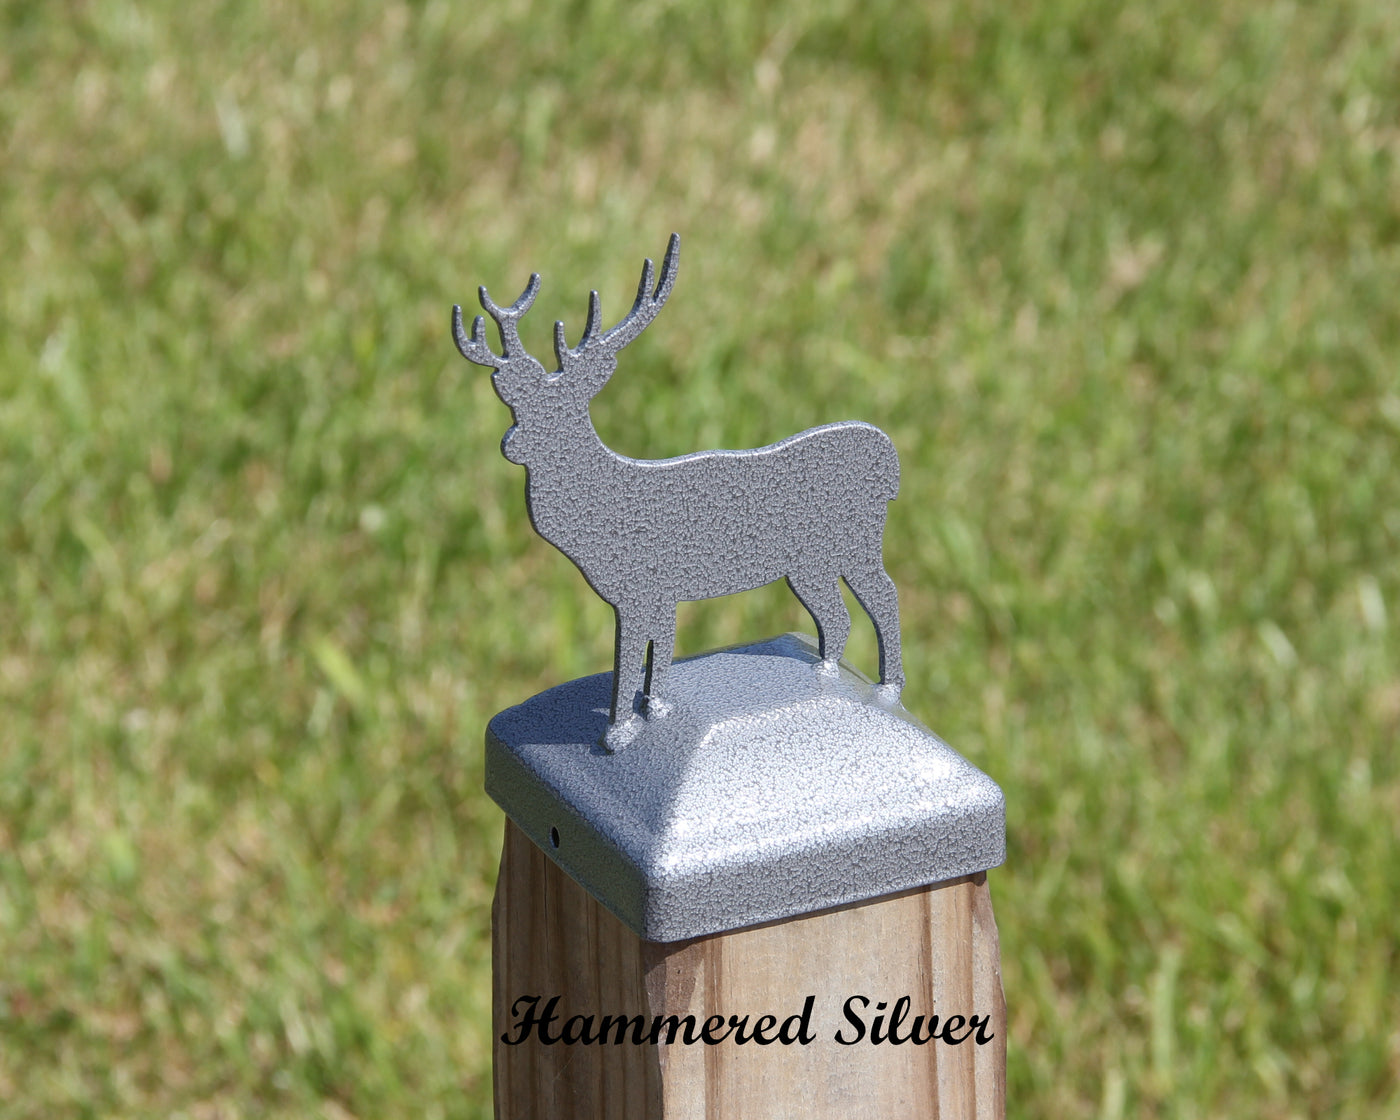 4X4 Deer Post Cap - Madison Iron and Wood - Post Cap - metal outdoor decor - Steel deocrations - american made products - veteran owned business products - fencing decorations - fencing supplies - custom wall decorations - personalized wall signs - steel - decorative post caps - steel post caps - metal post caps - brackets - structural brackets - home improvement - easter - easter decorations - easter gift - easter yard decor